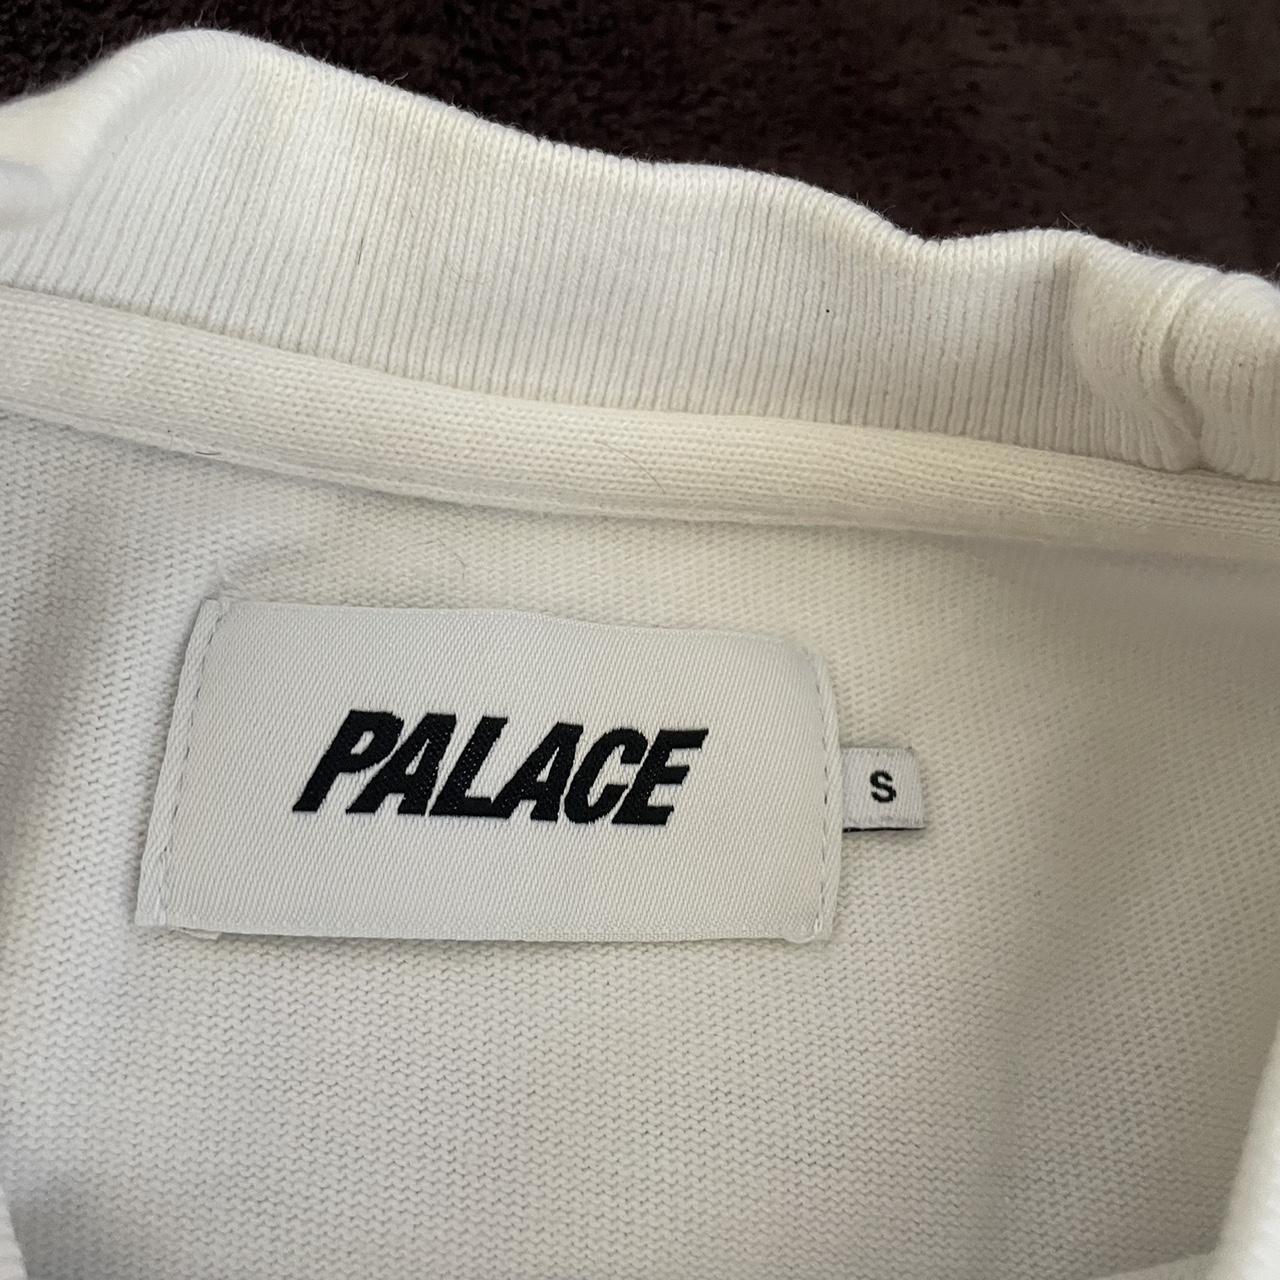 Palace Men's White and Red Sweatshirt (2)